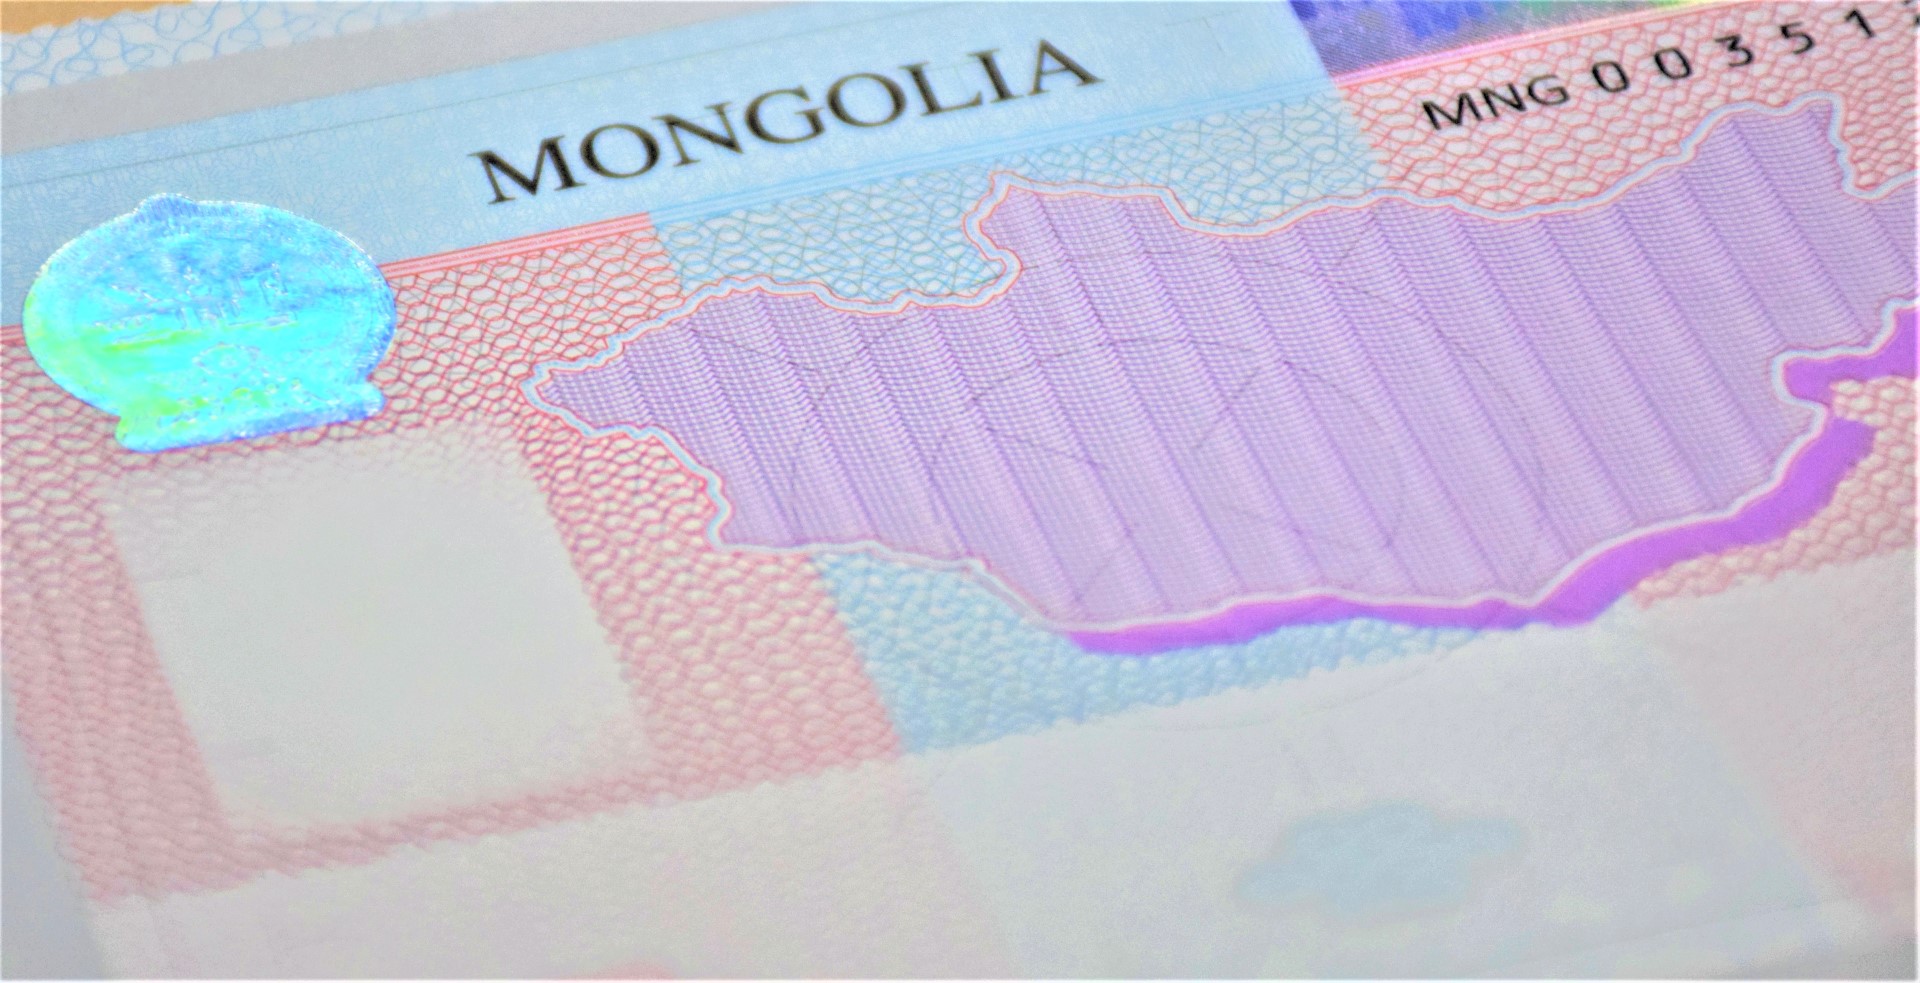 Immigration Agency of Mongolia has been accepting online visa extension requests since June 13 2022